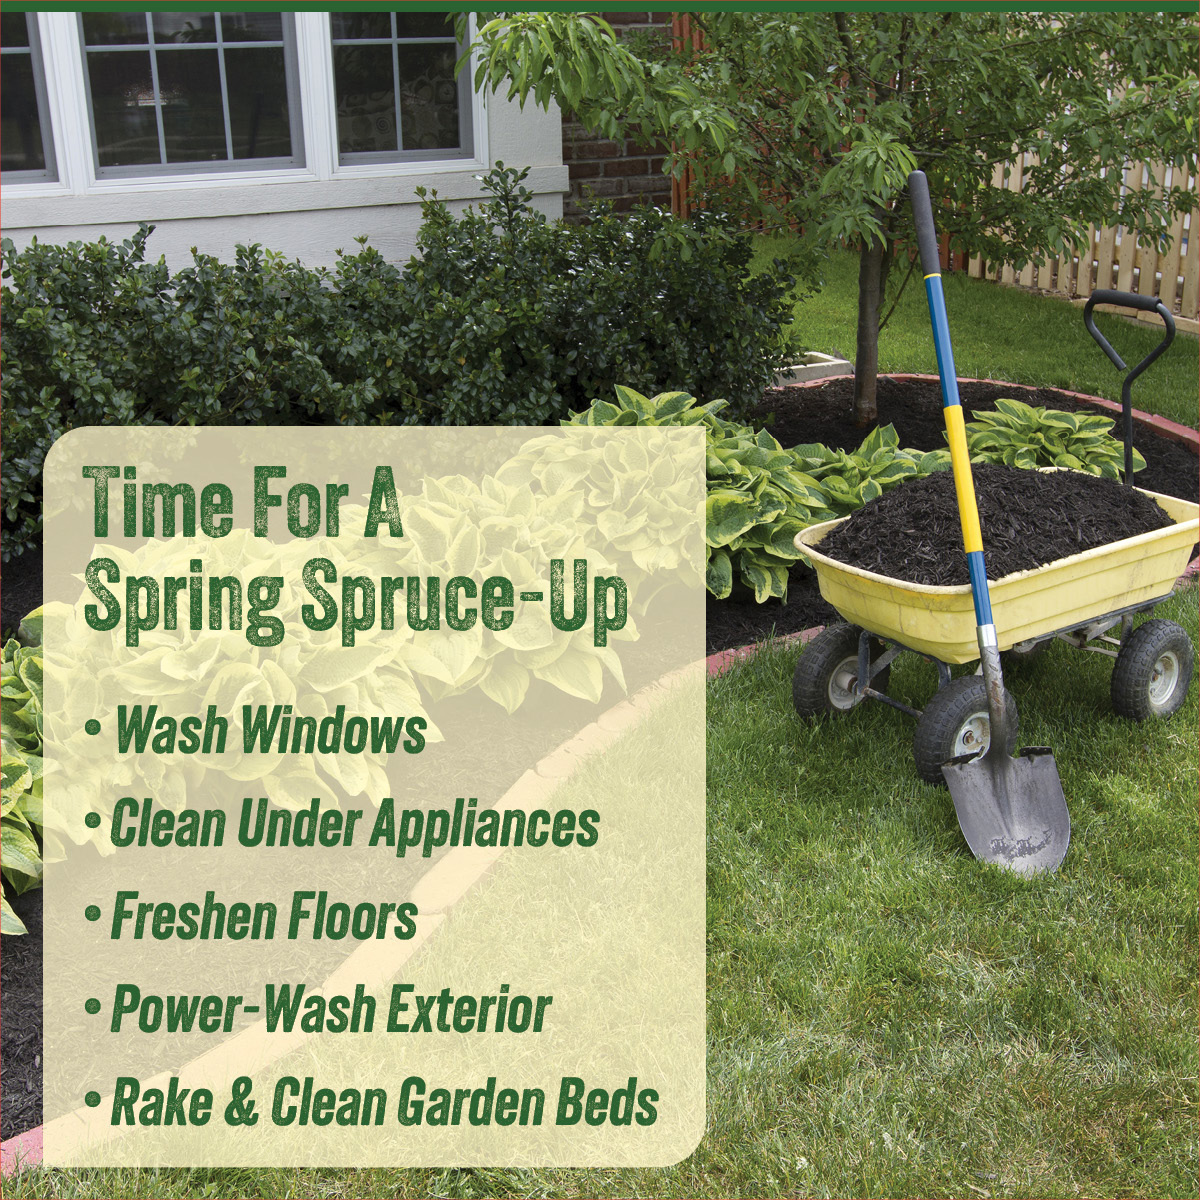 Springtime is a great time for sprucing up. Just by doing these 5 things, you'll give your house the seasonal refresh it needs.
#newpurchase#homeloans#greatrates#fastclose#greatservice